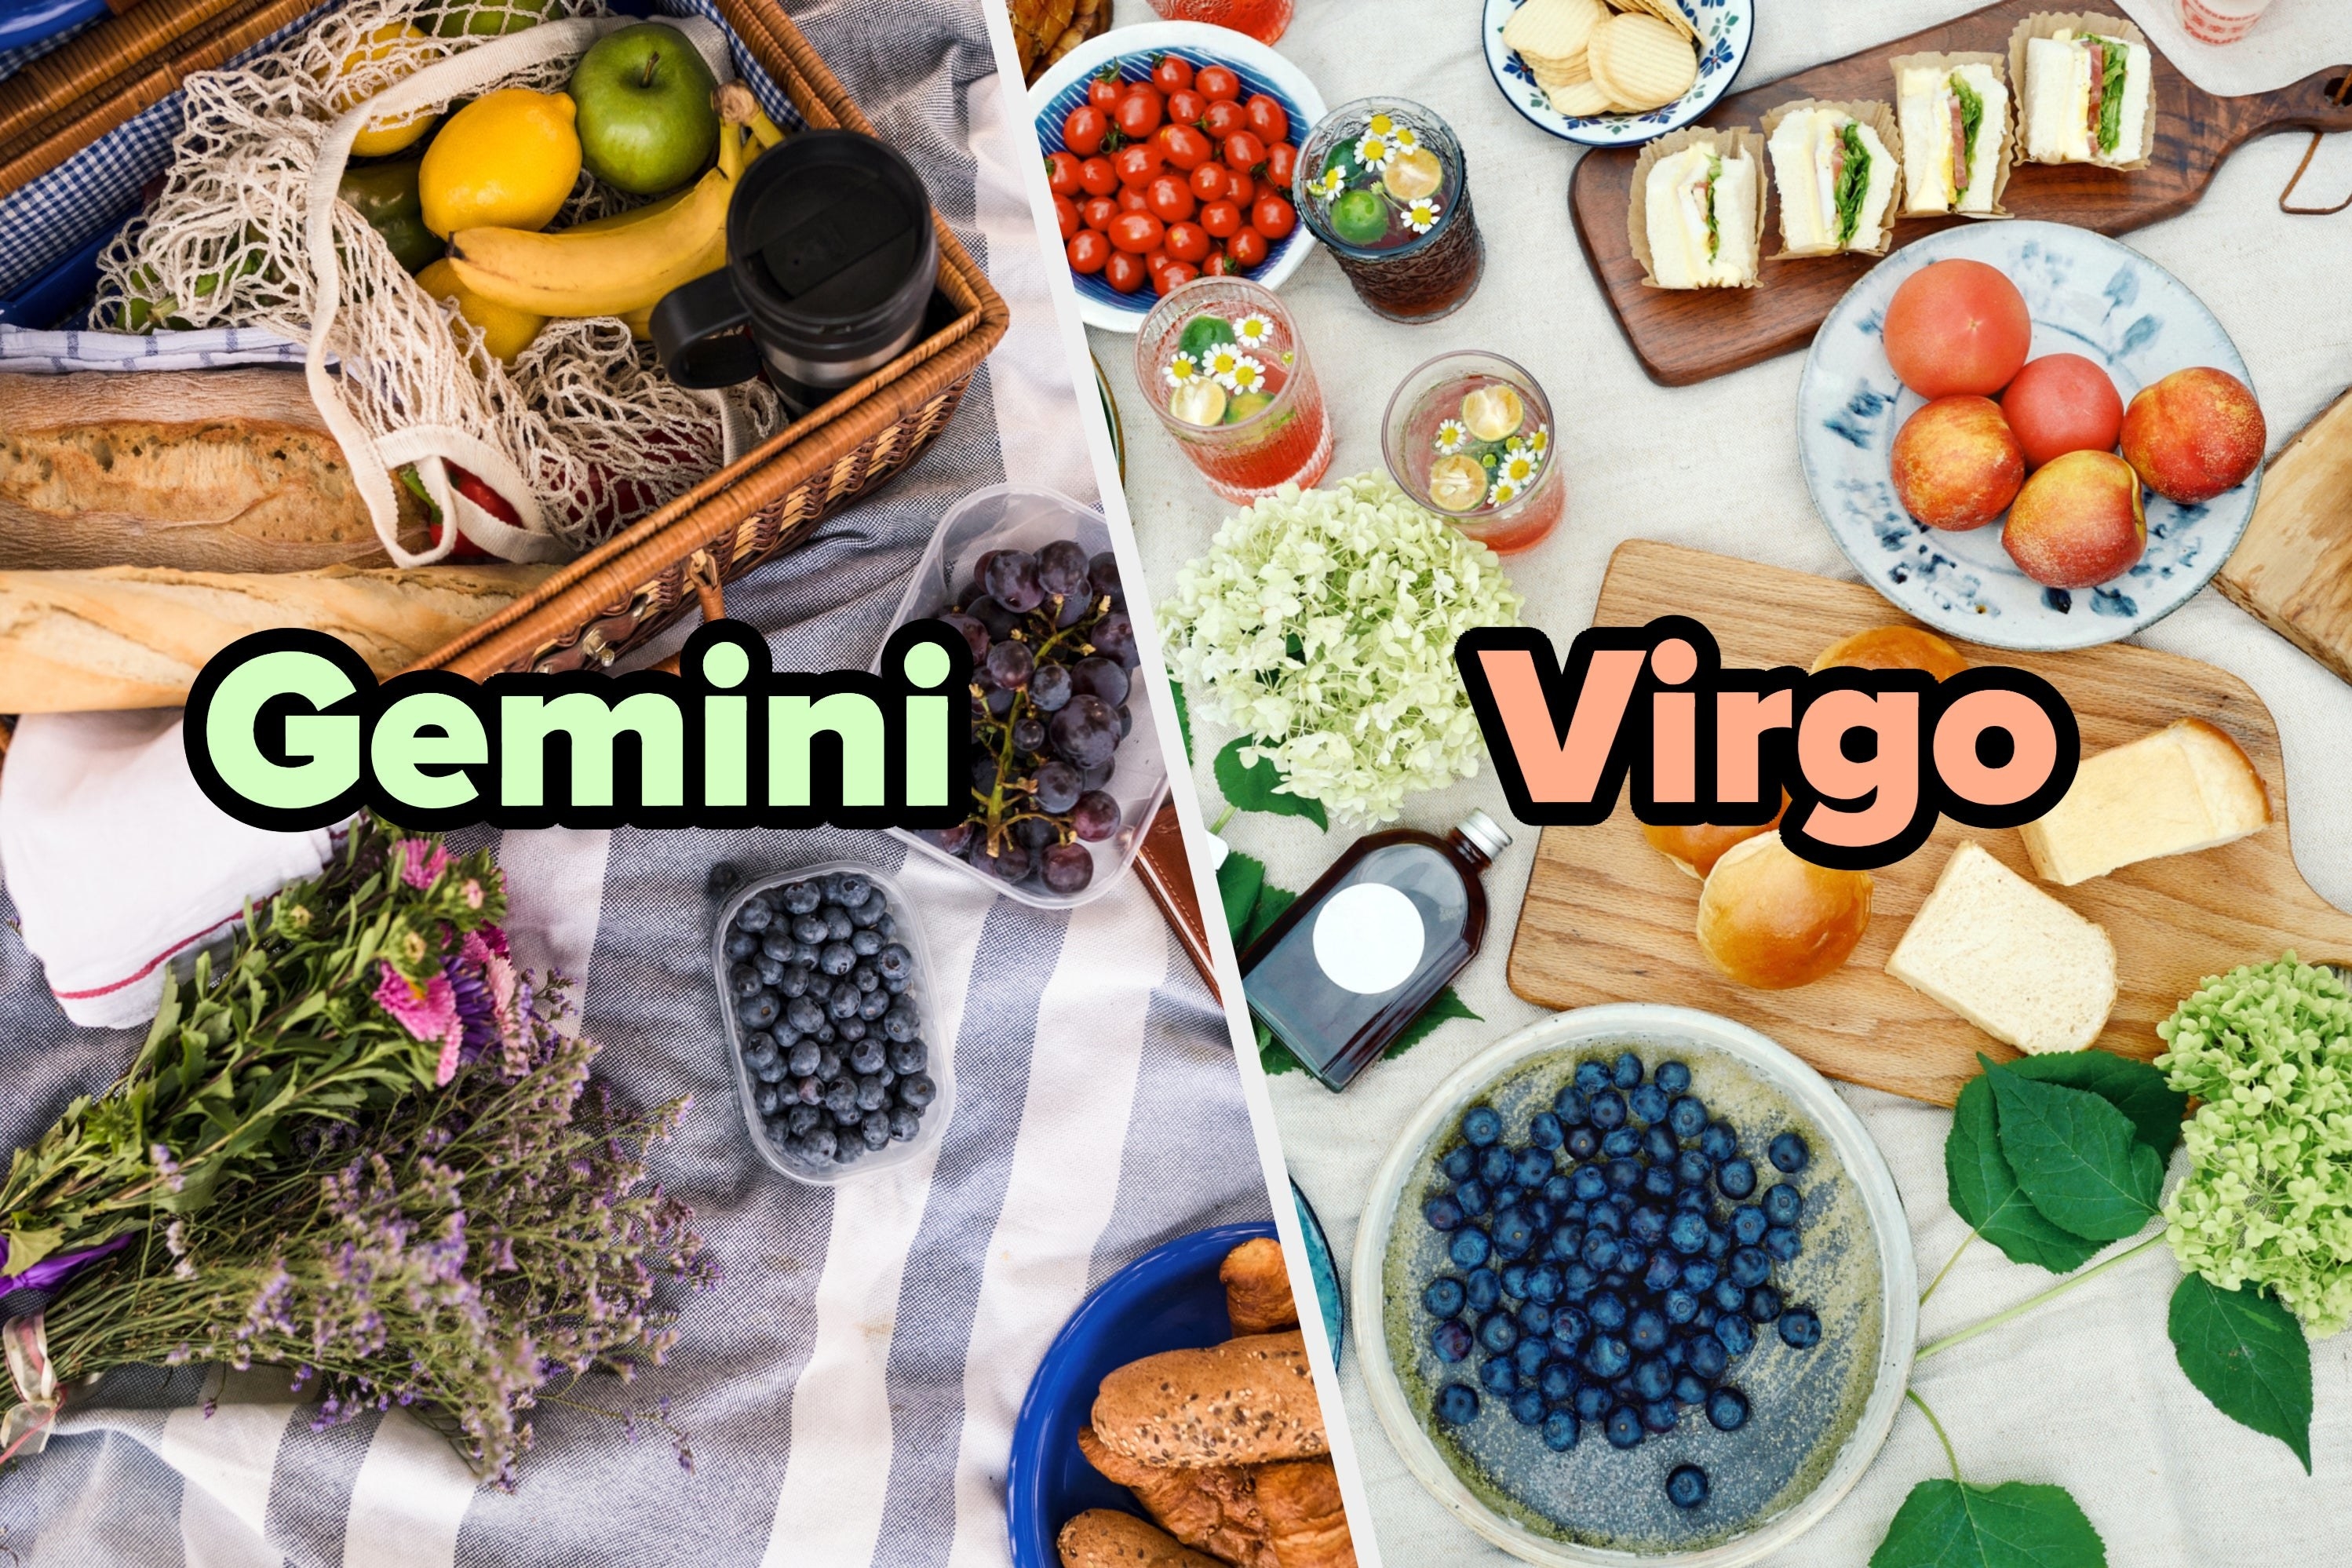 Picnic with the words &quot;Gemini&quot; and &quot;Virgo&quot;